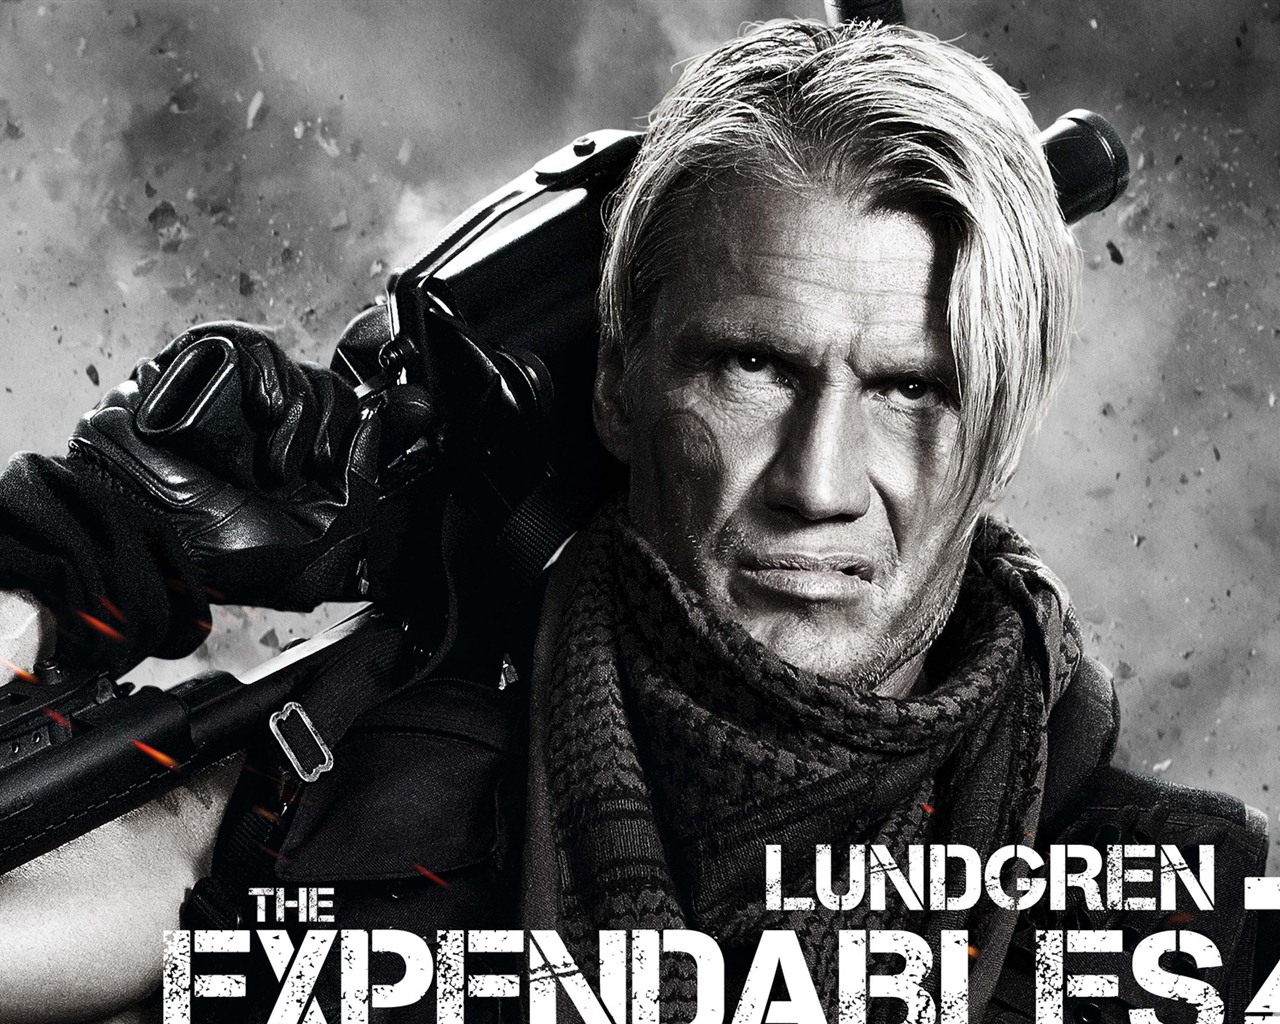 2012 Expendables2 HDの壁紙 #3 - 1280x1024